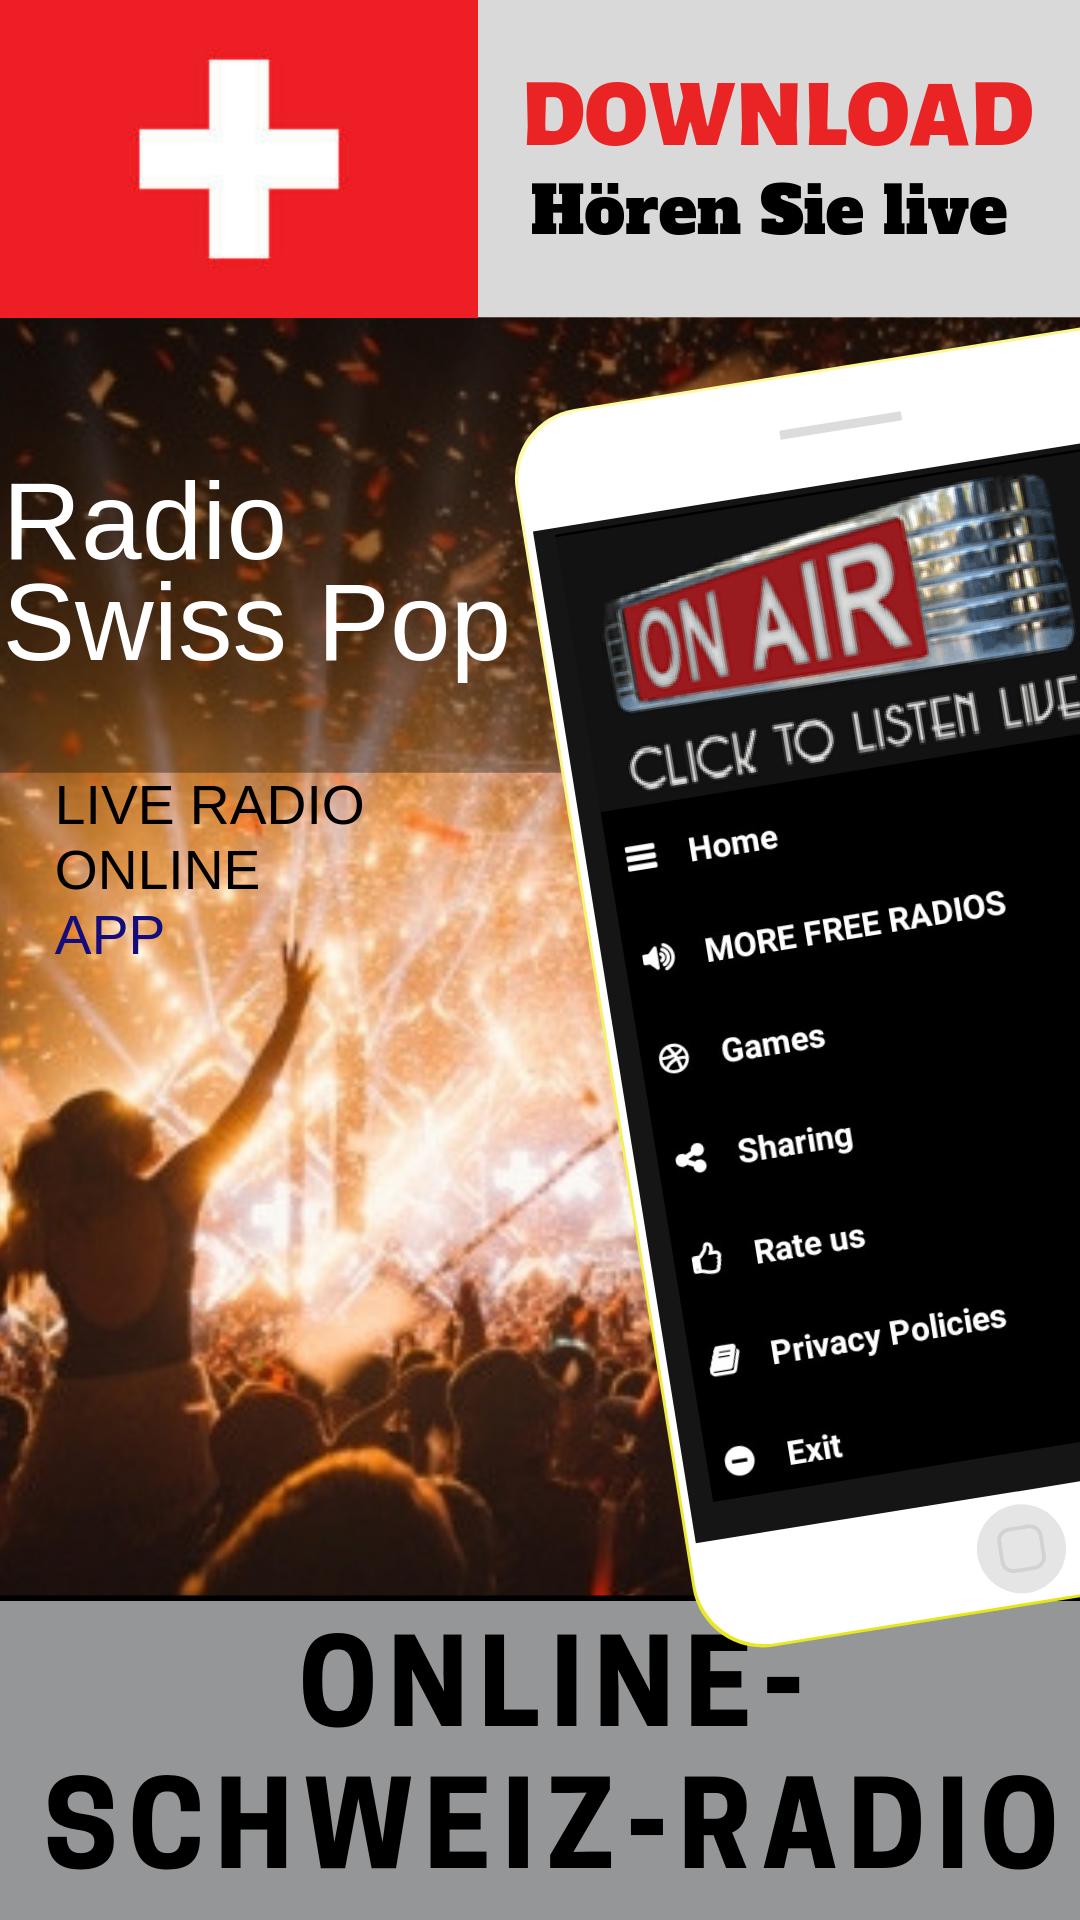 Radio Swiss Pop Free Online for Android - APK Download